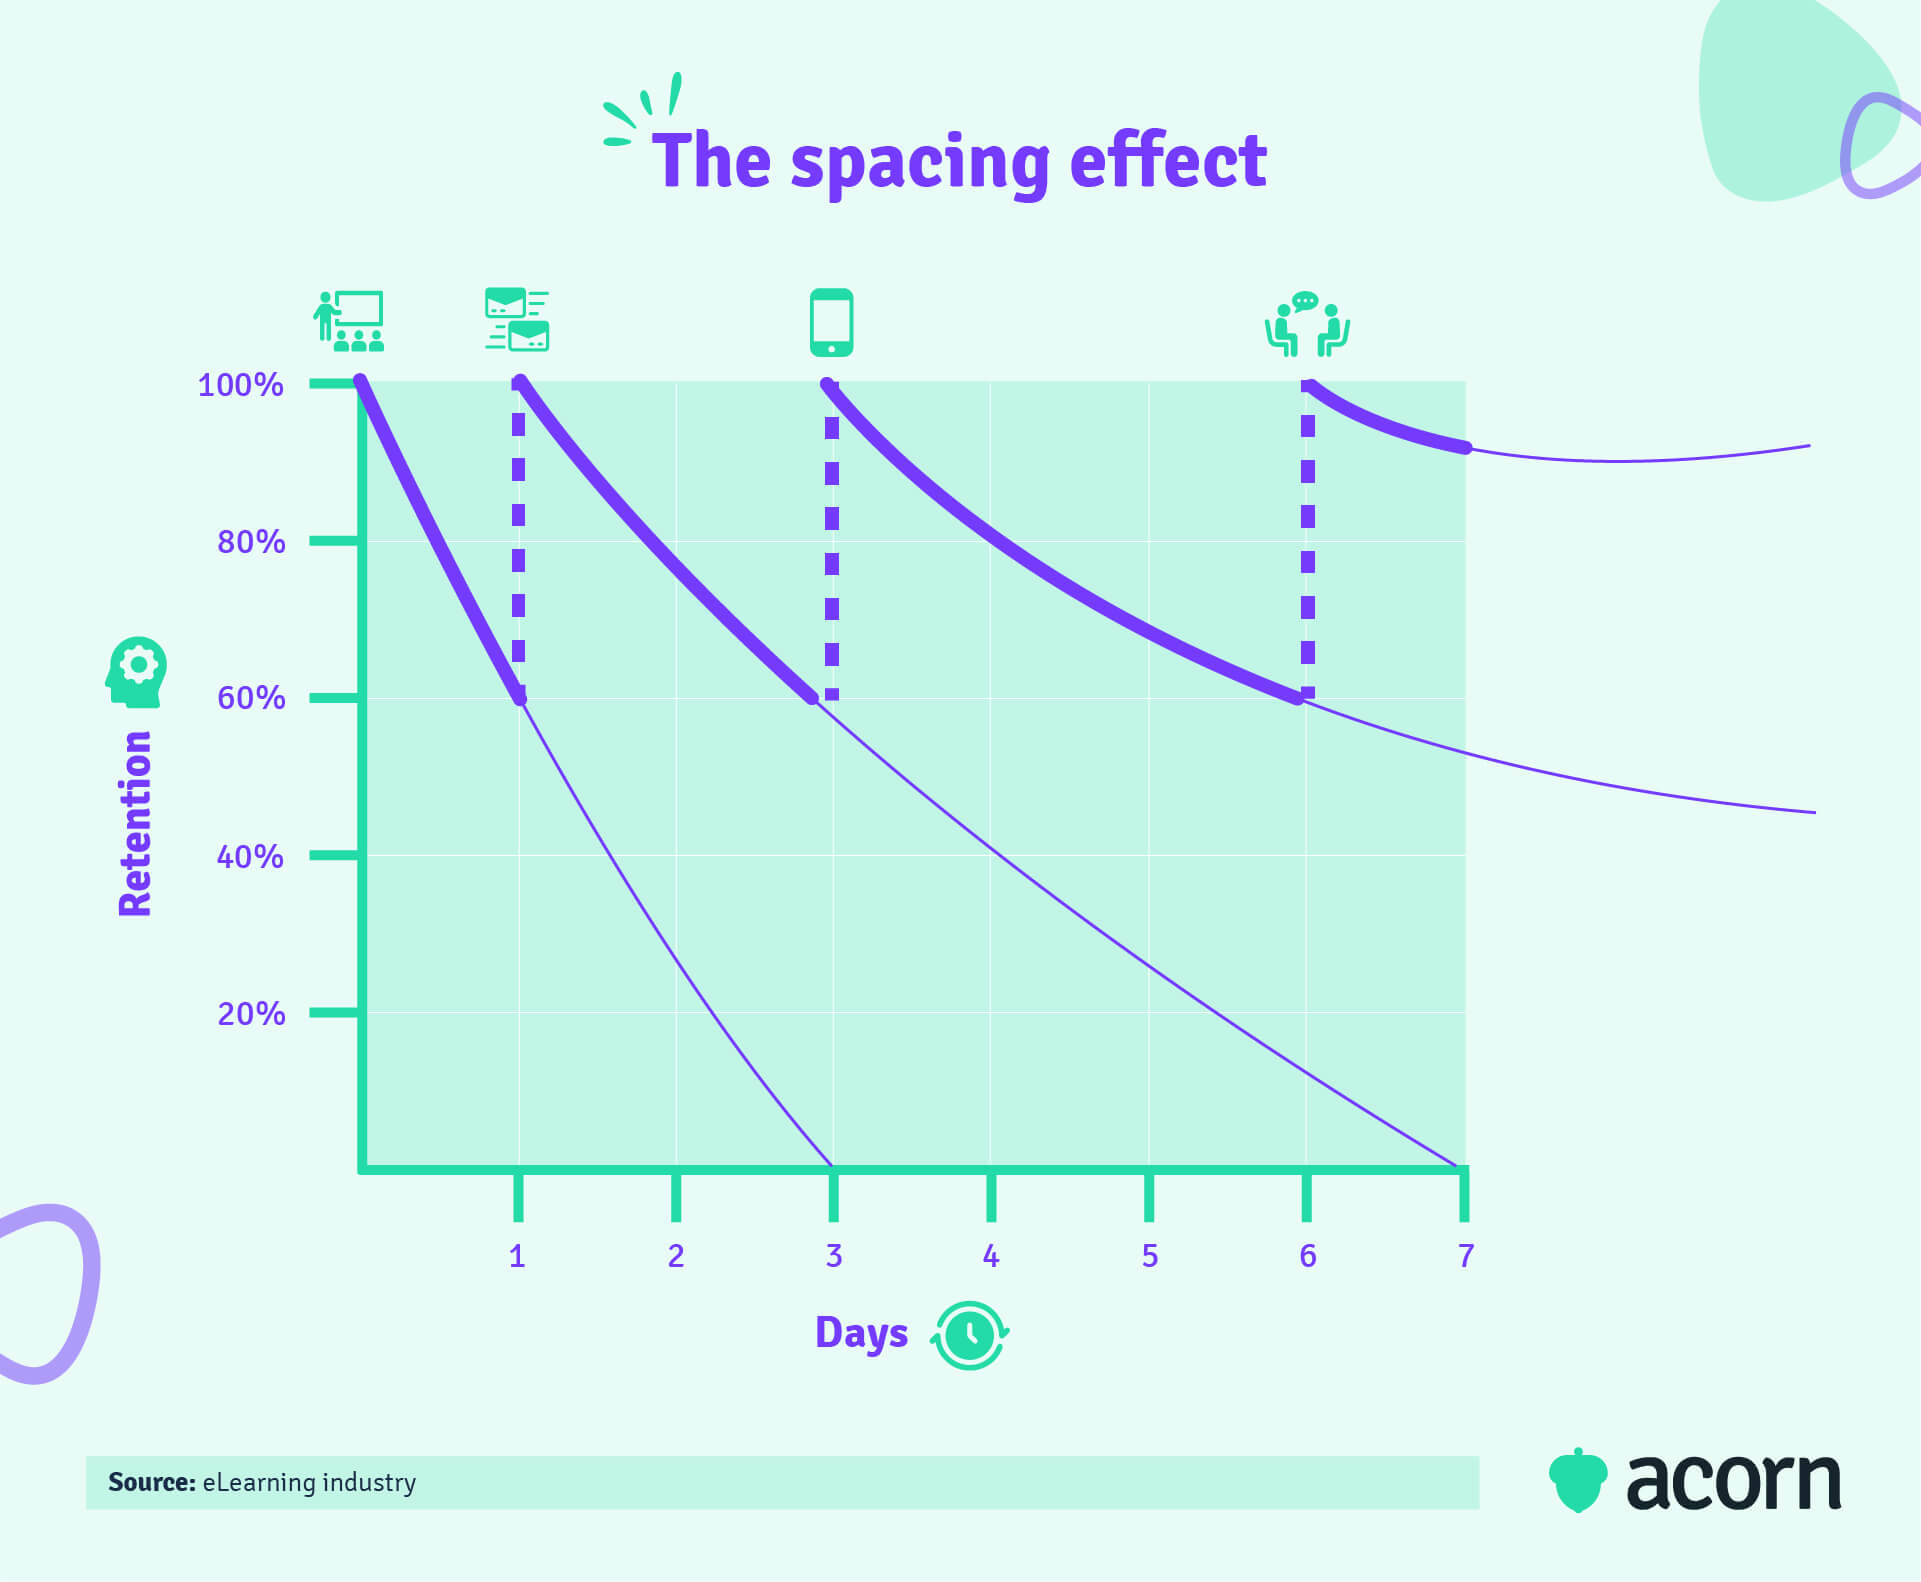 Line graph visualising the "spacing effect" on knowledge retention when learning is spaced out and reinforced regularly